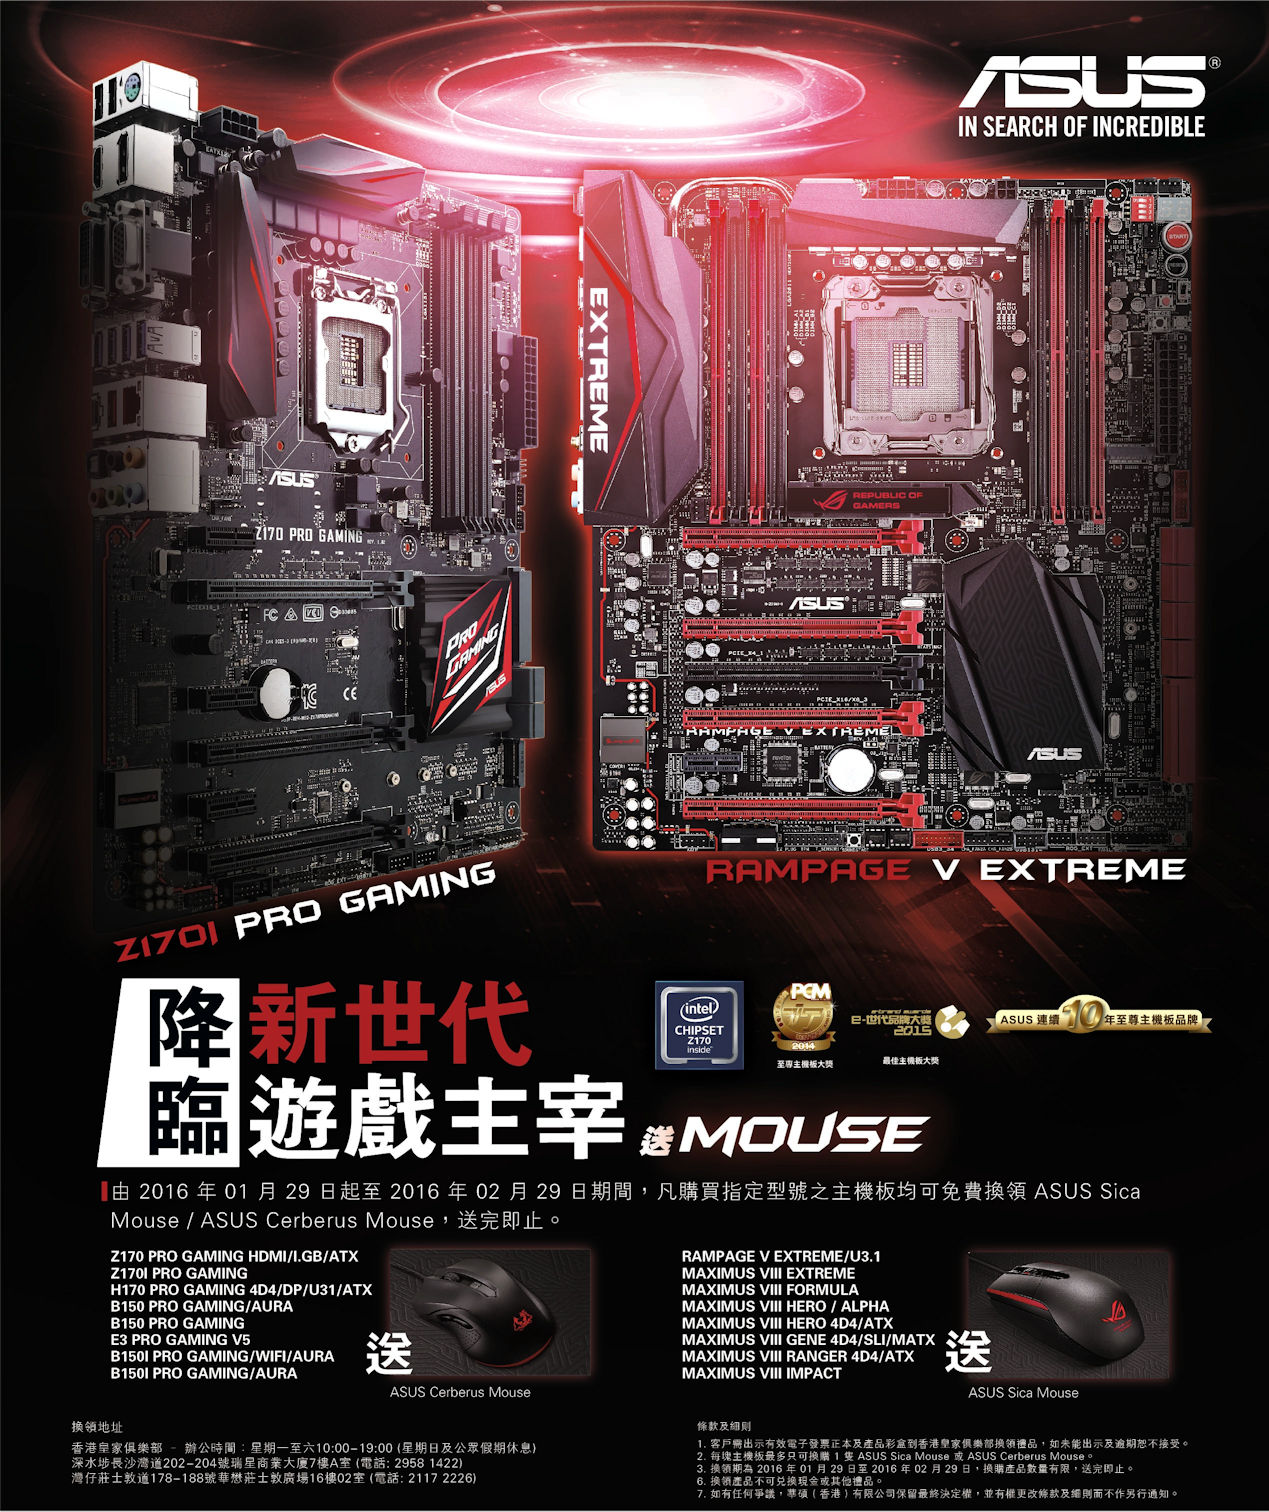 ASUS CNY 2016 Promotion